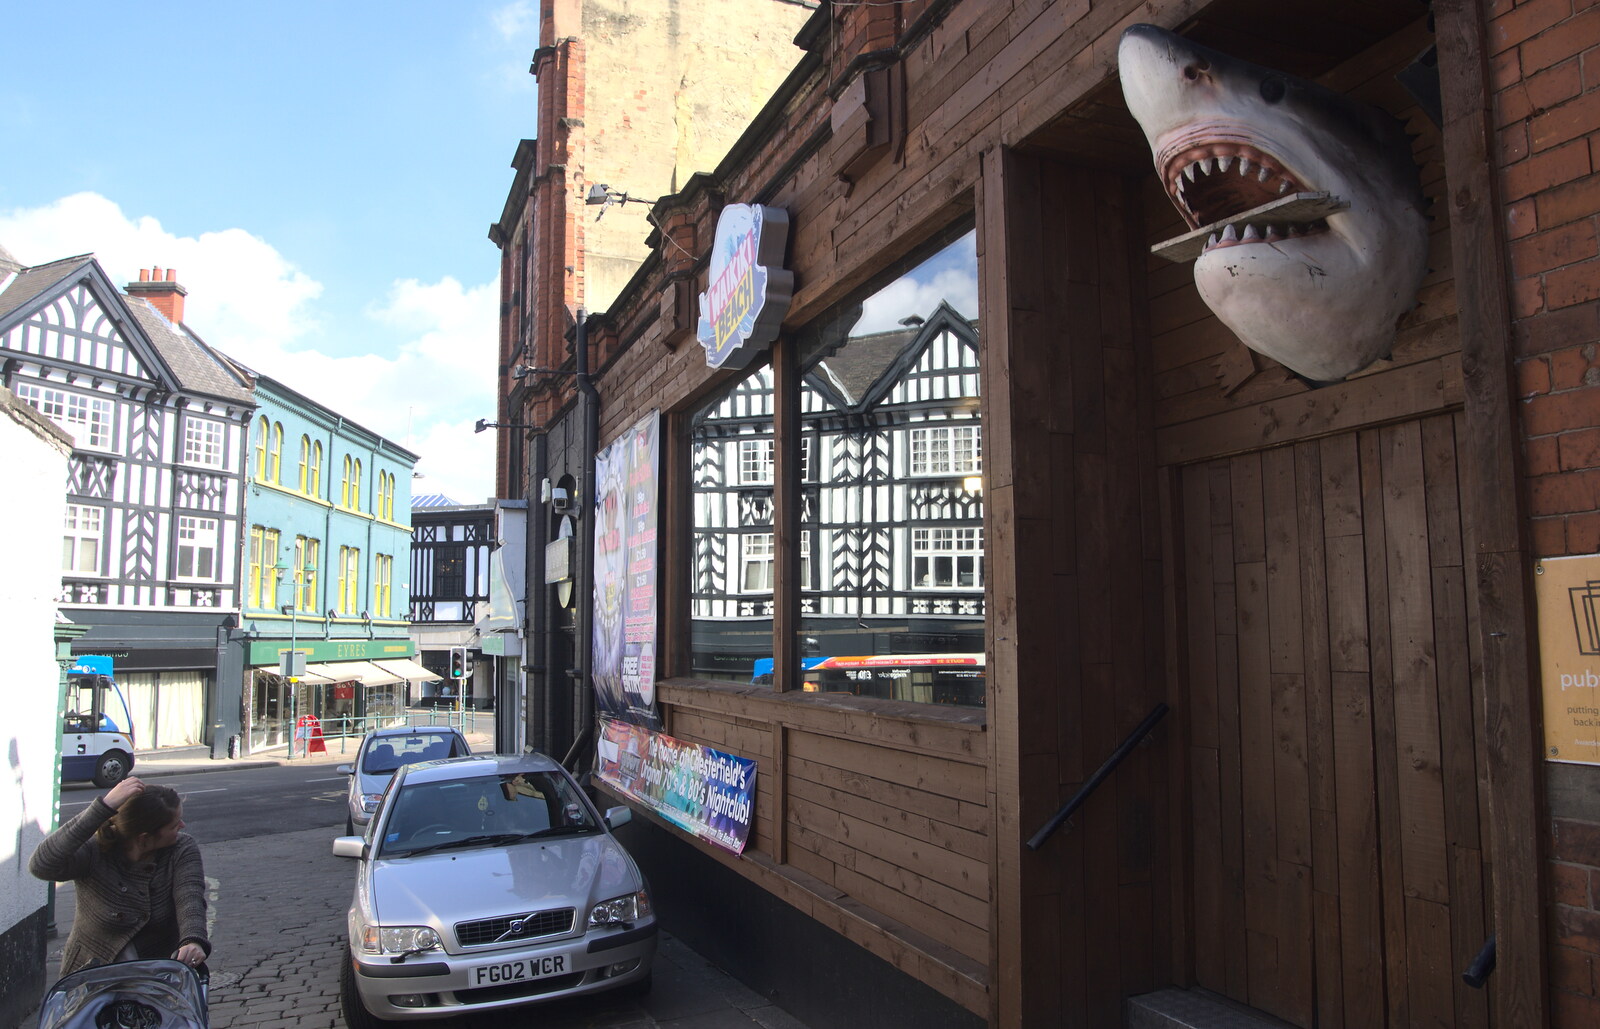 There's a comedy shark head stuck to a wall from Chesterfield and the Twisty Spire, Derbyshire - 19th April 2013